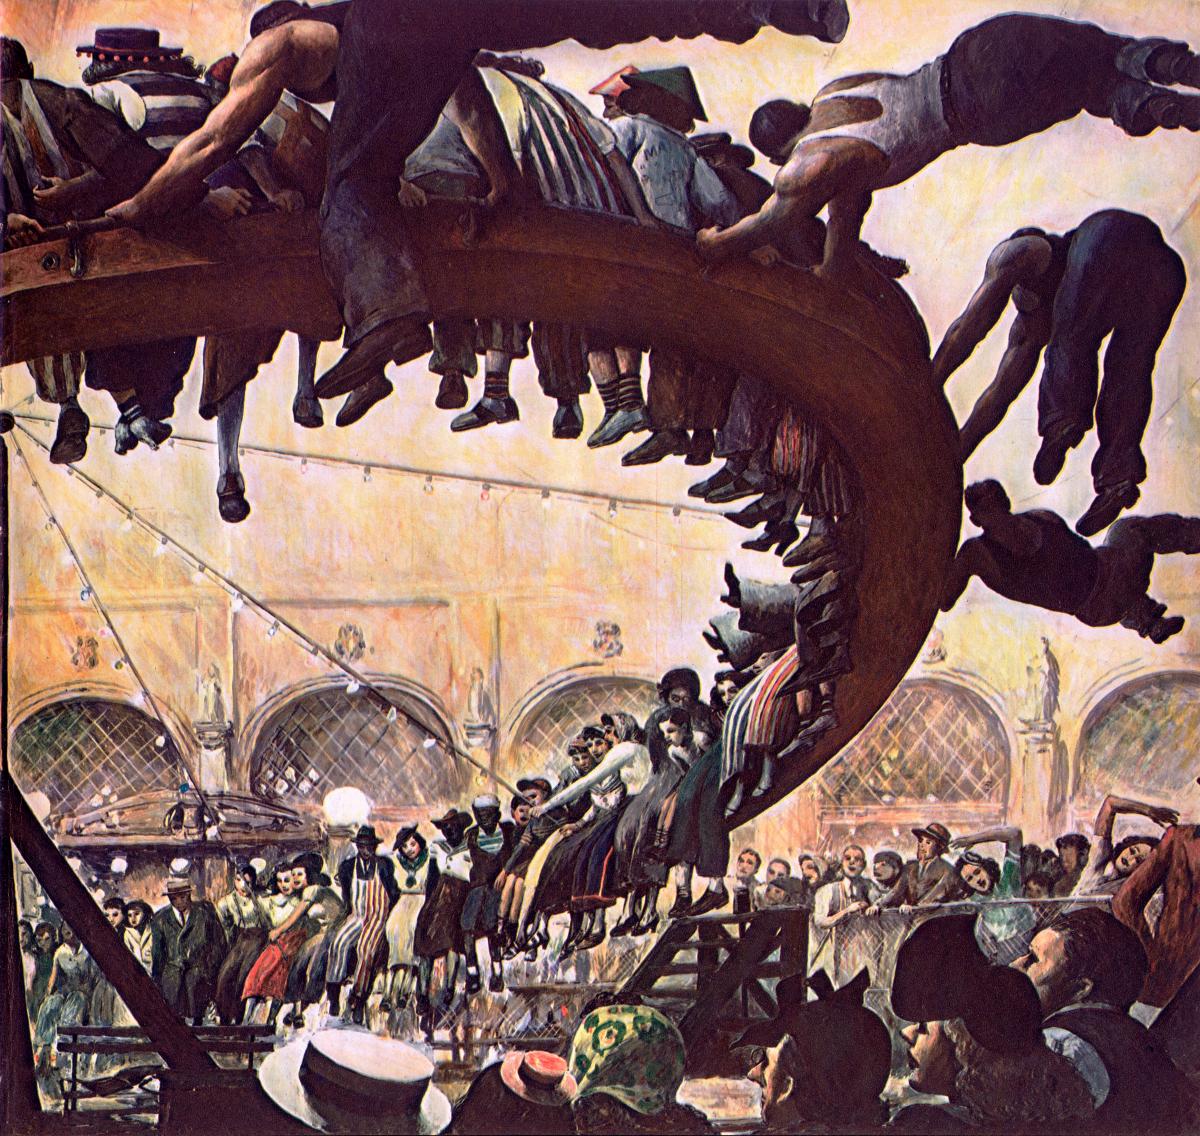 "To Heaven by Subway" by Robert Riggs, illustrating a huge crowd riding a Coney Island attraction